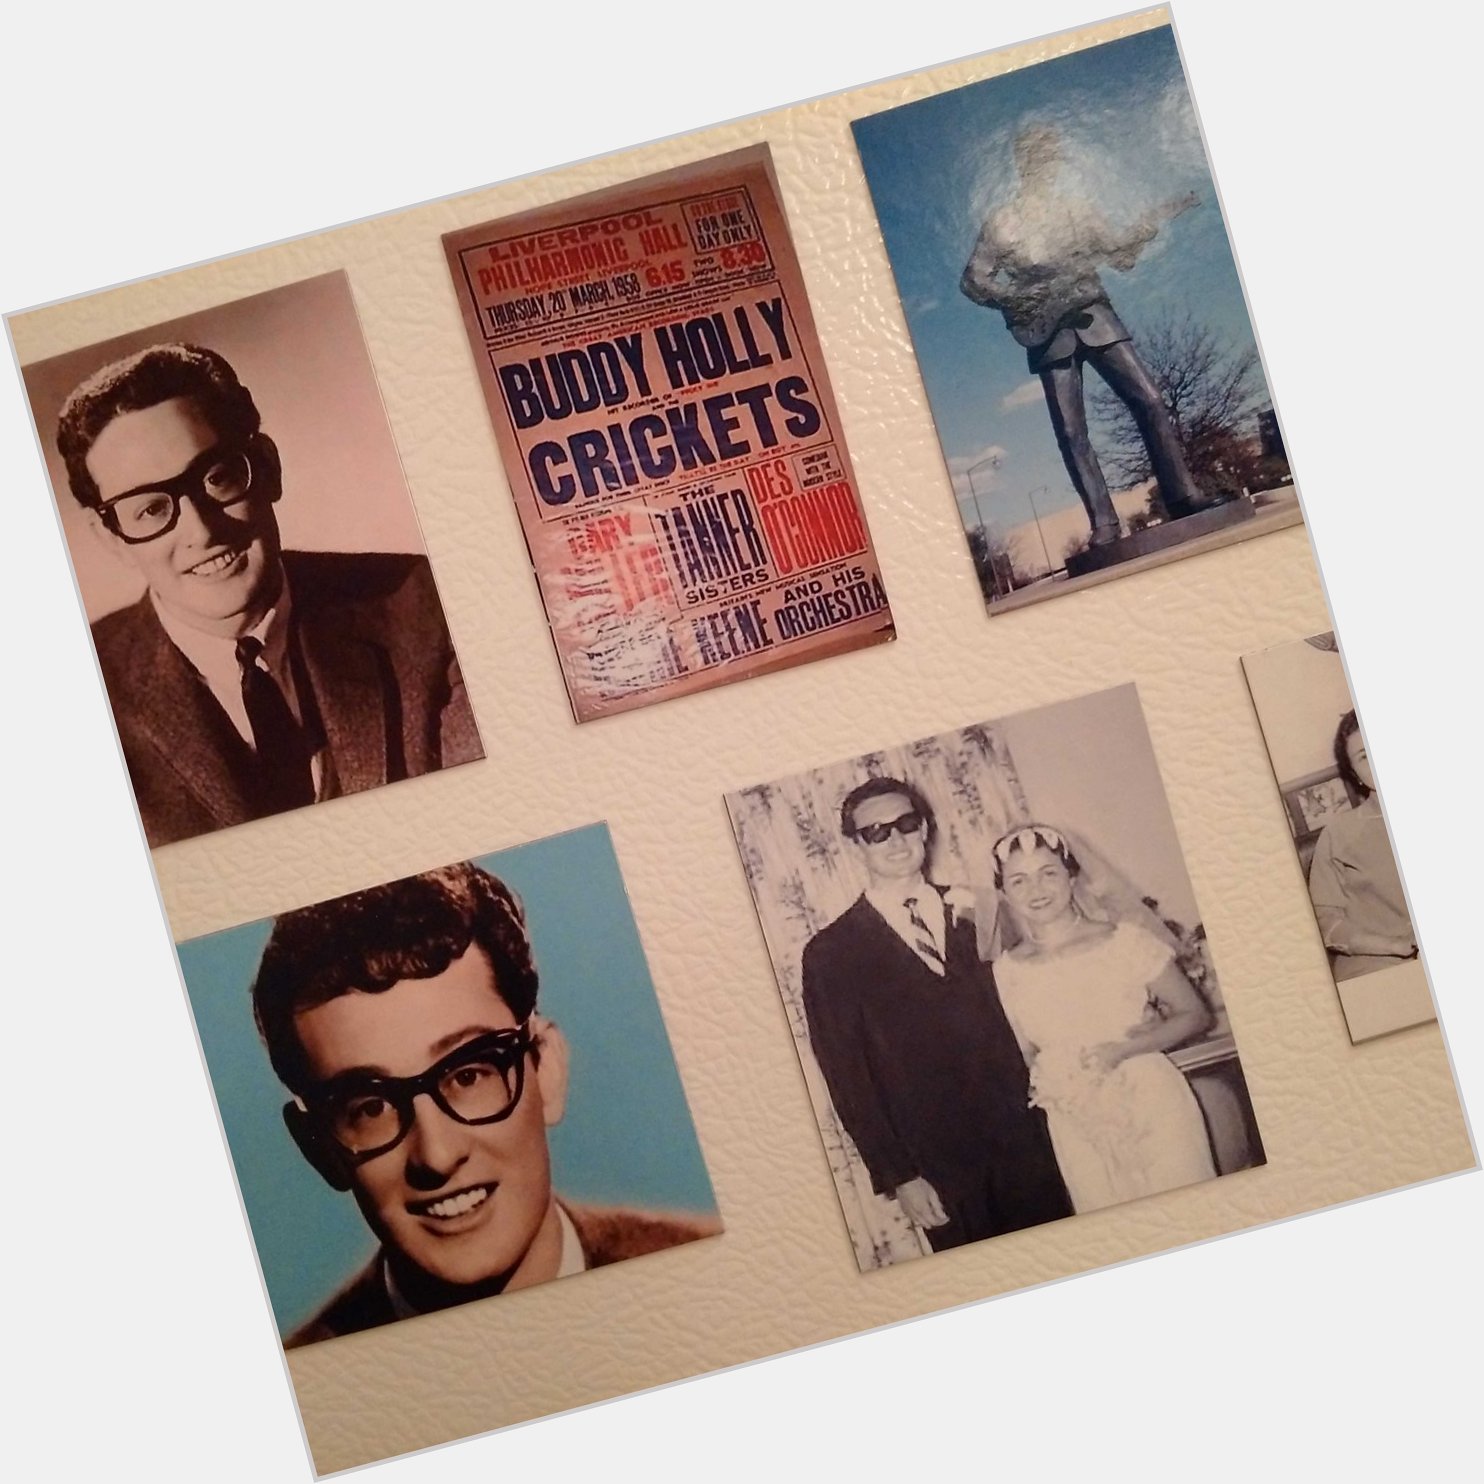 Happy 81st birthday Buddy Holly. Tonight I will raise a glass to your genius and then \rock around with Ollie Vee\ 